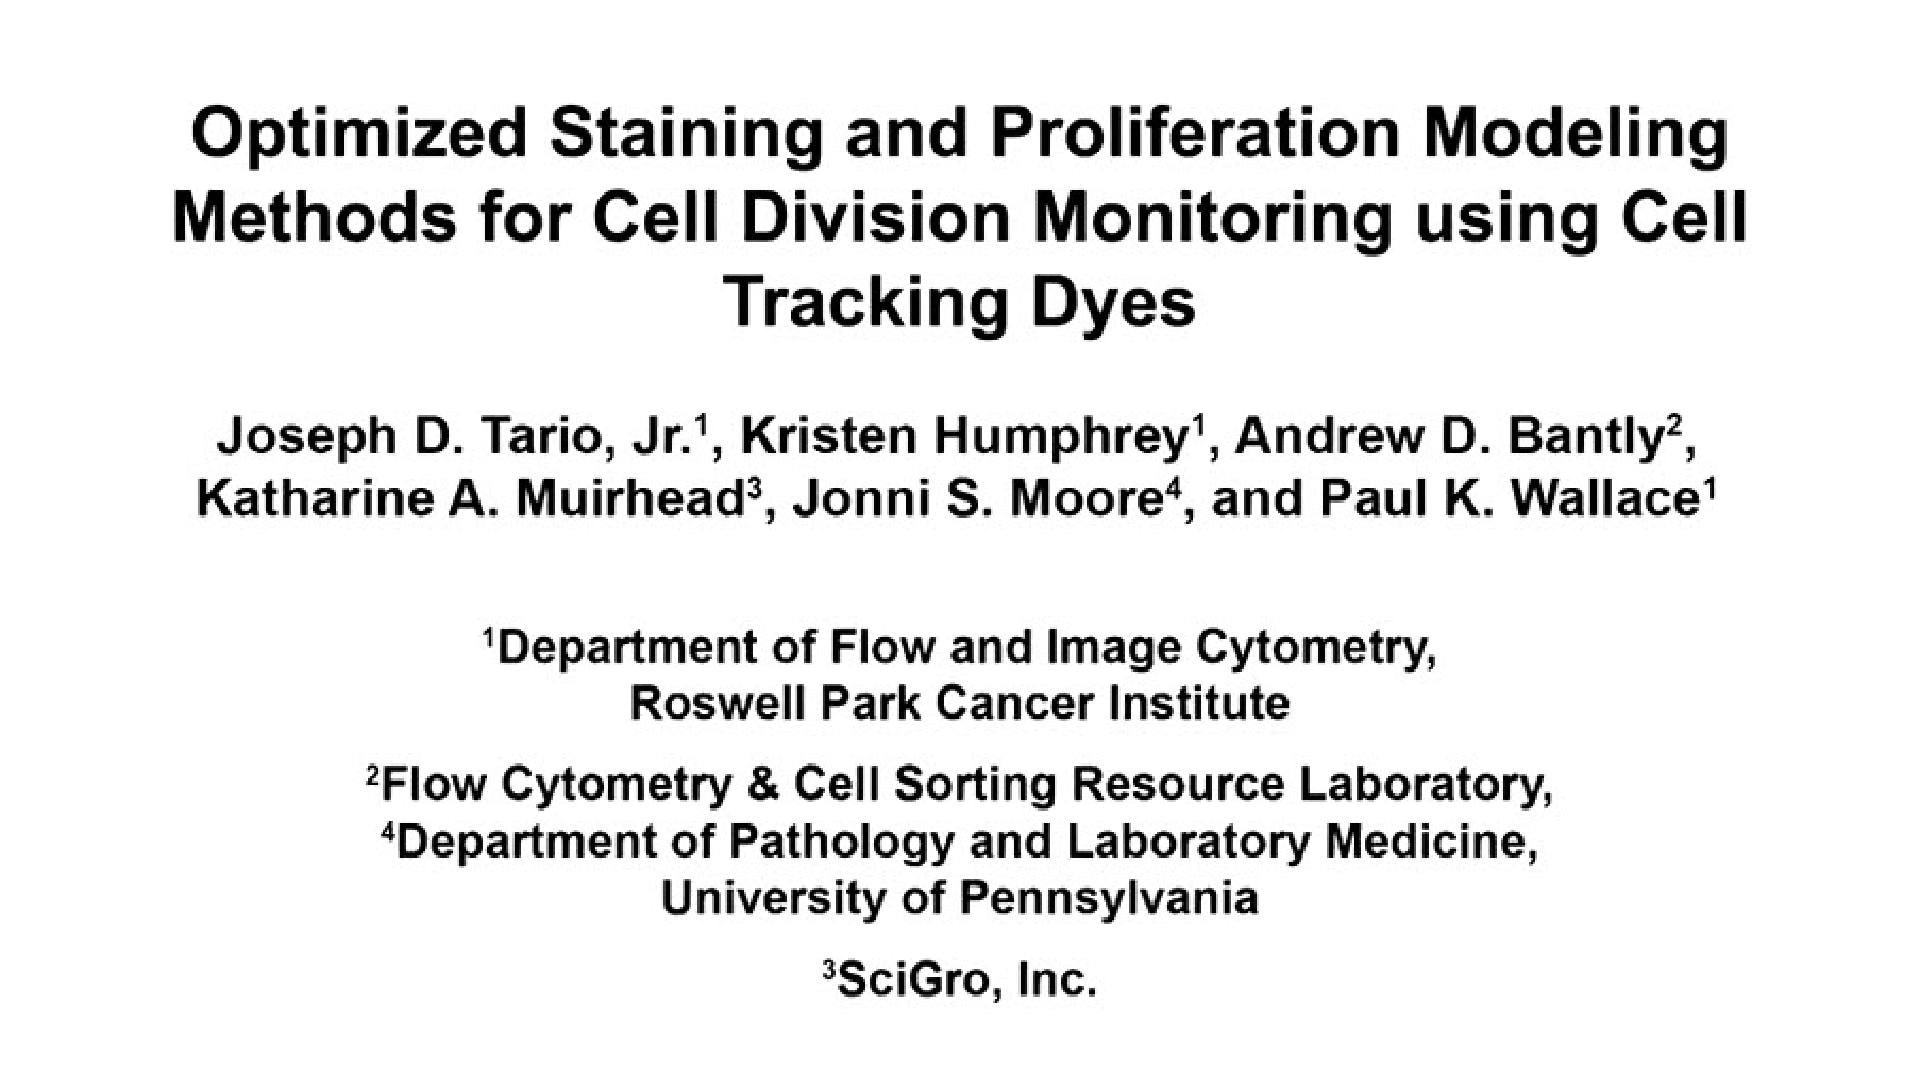 Optimized Staining and Proliferation Modeling Methods for Cell Division Monitoring using Cell Tracking Dyes